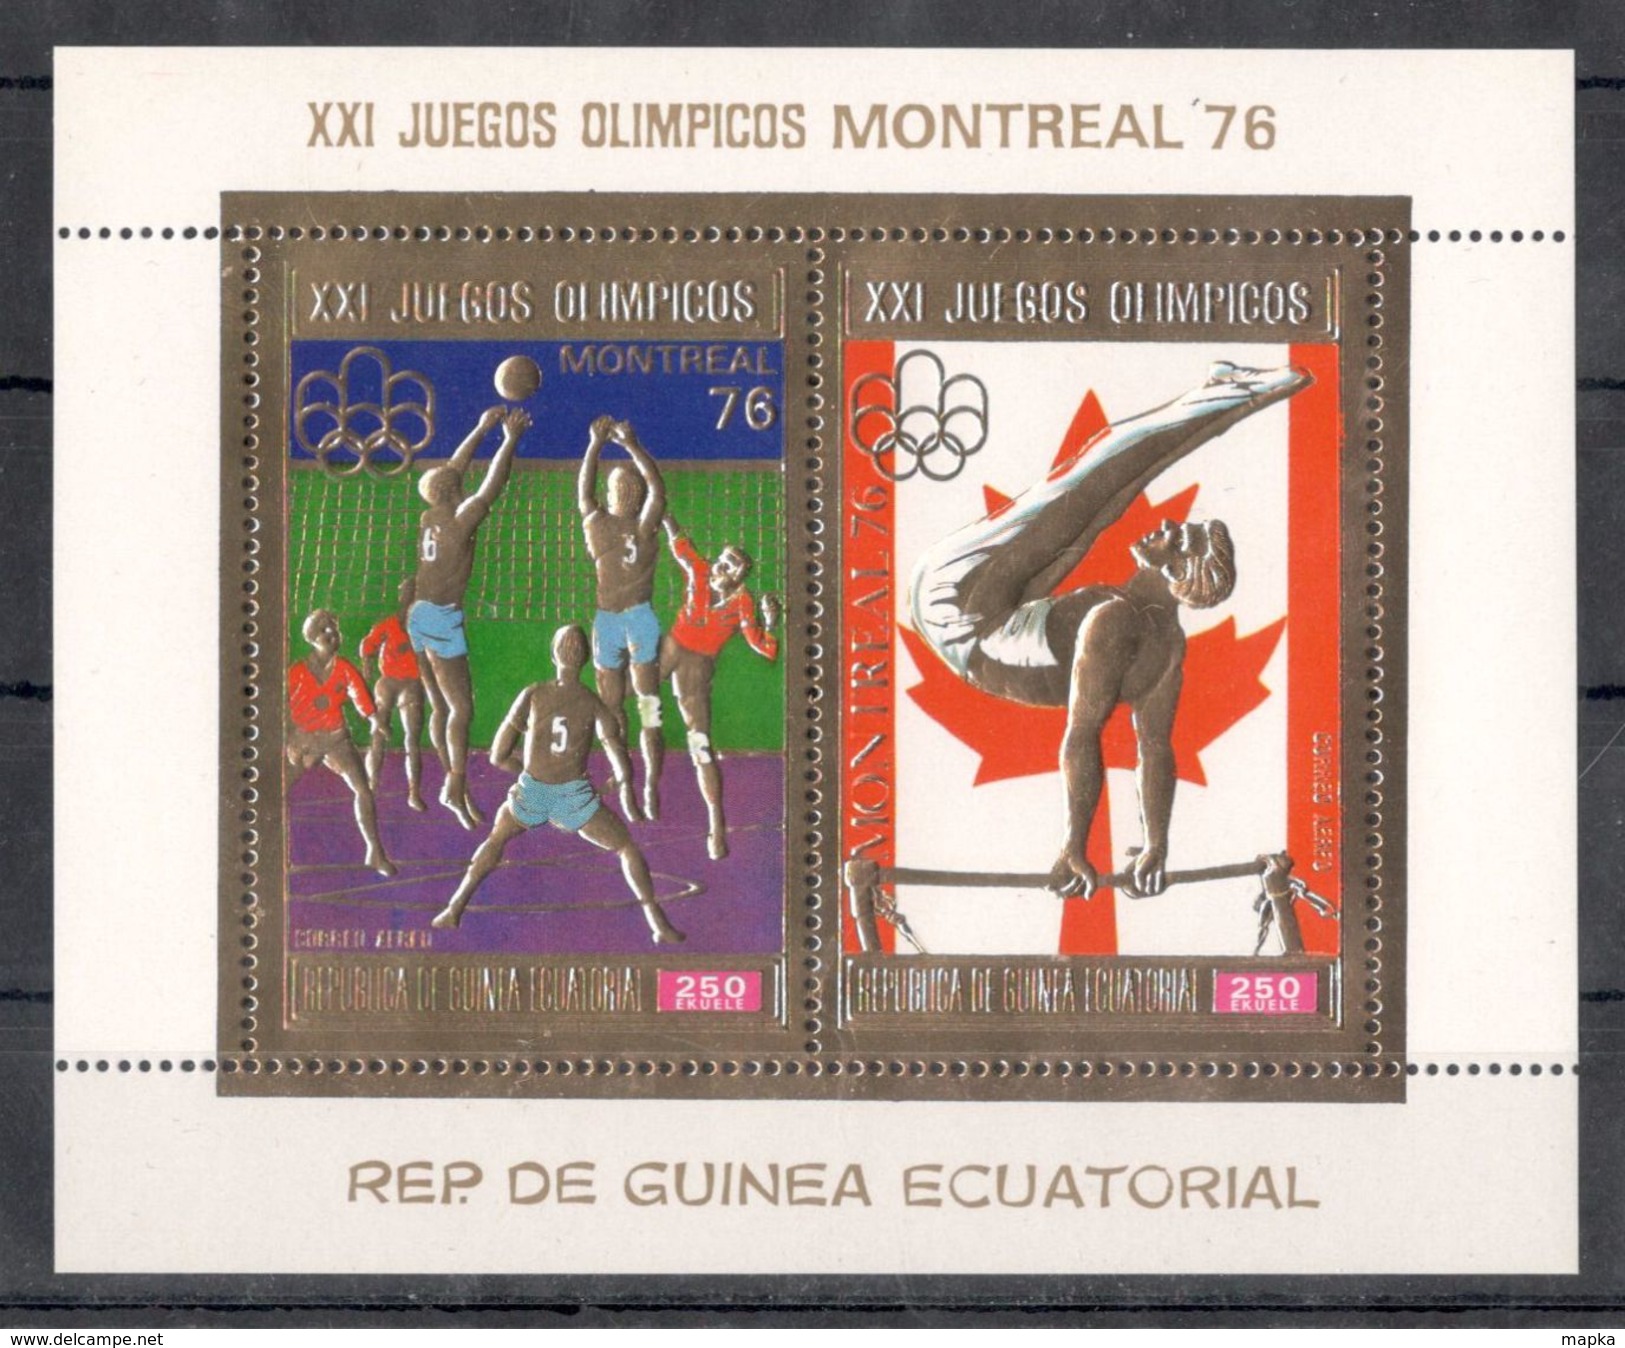 L611 GUINEA ECUATORIAL GOLD OLYMPIC GAMES MONTREAL 76 VOLLEYBALL GYMNASTICS 1KB MNH - Sommer 1976: Montreal